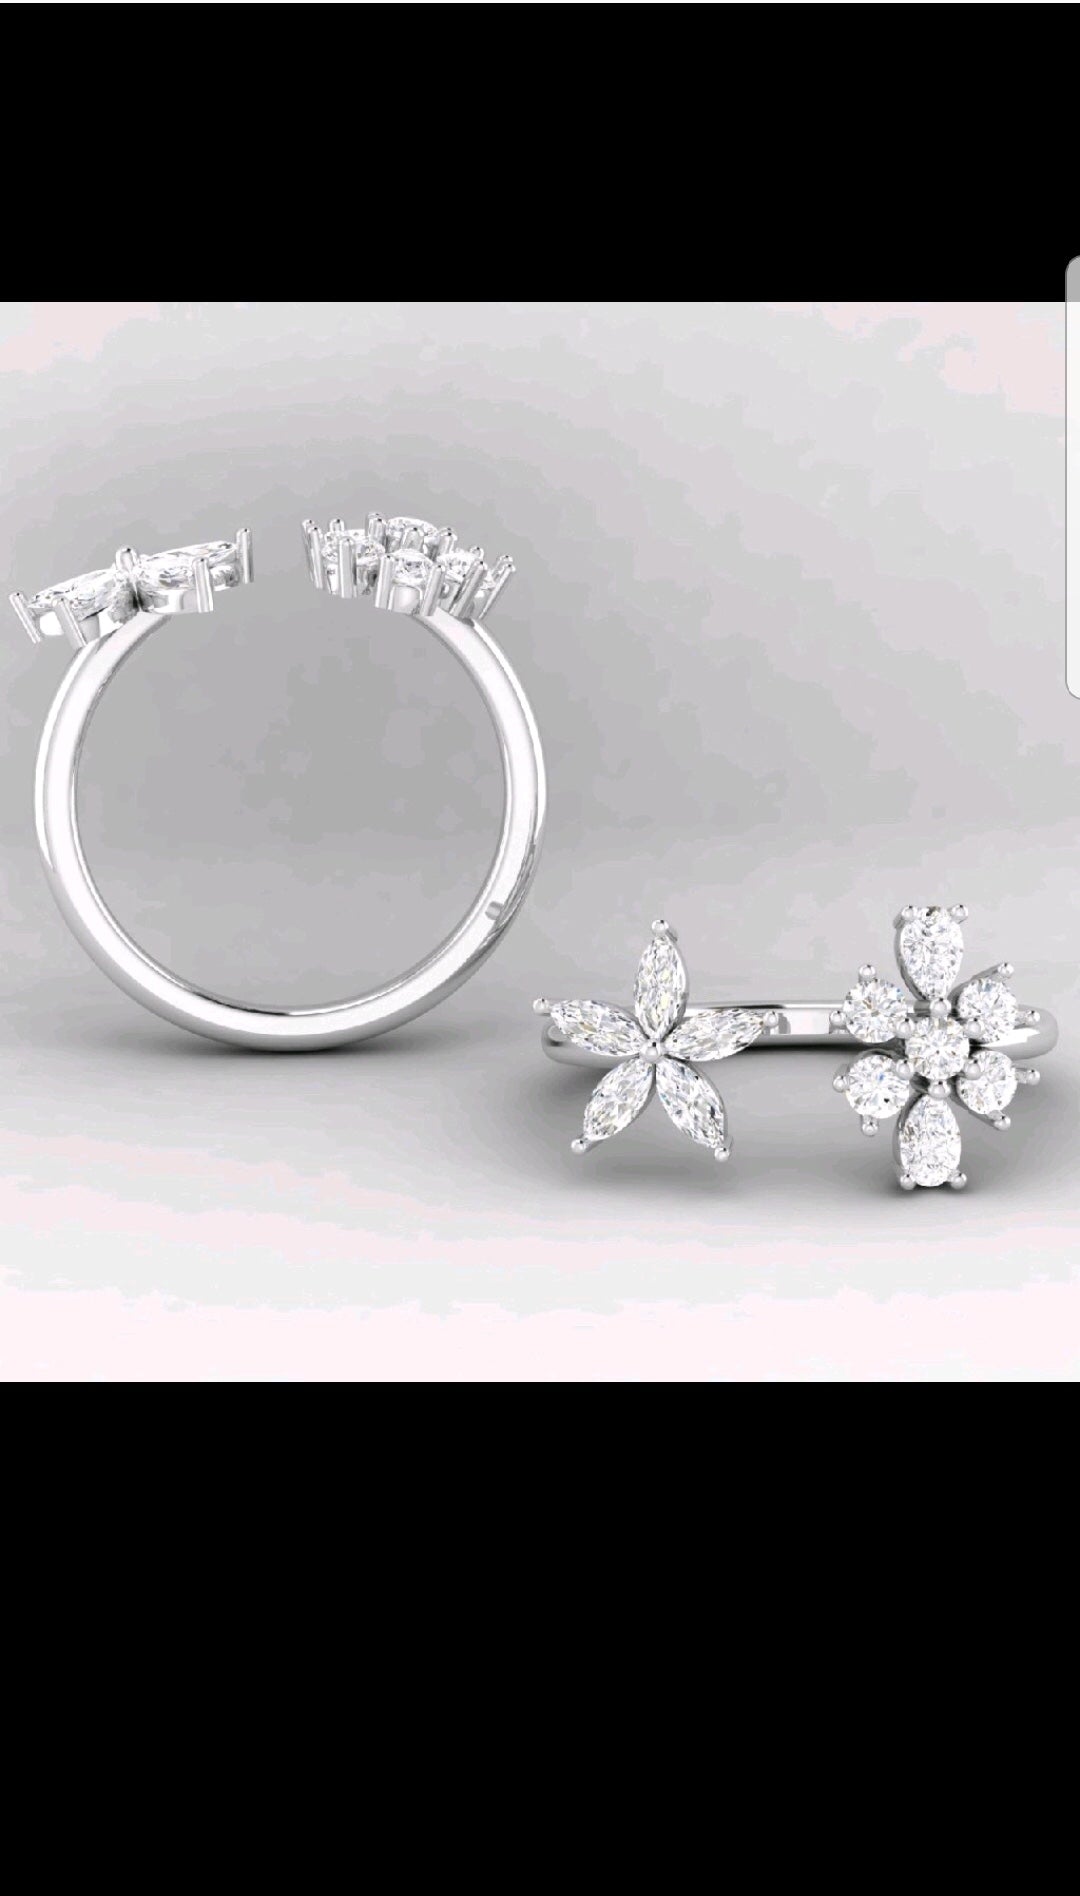 White gold floral rings